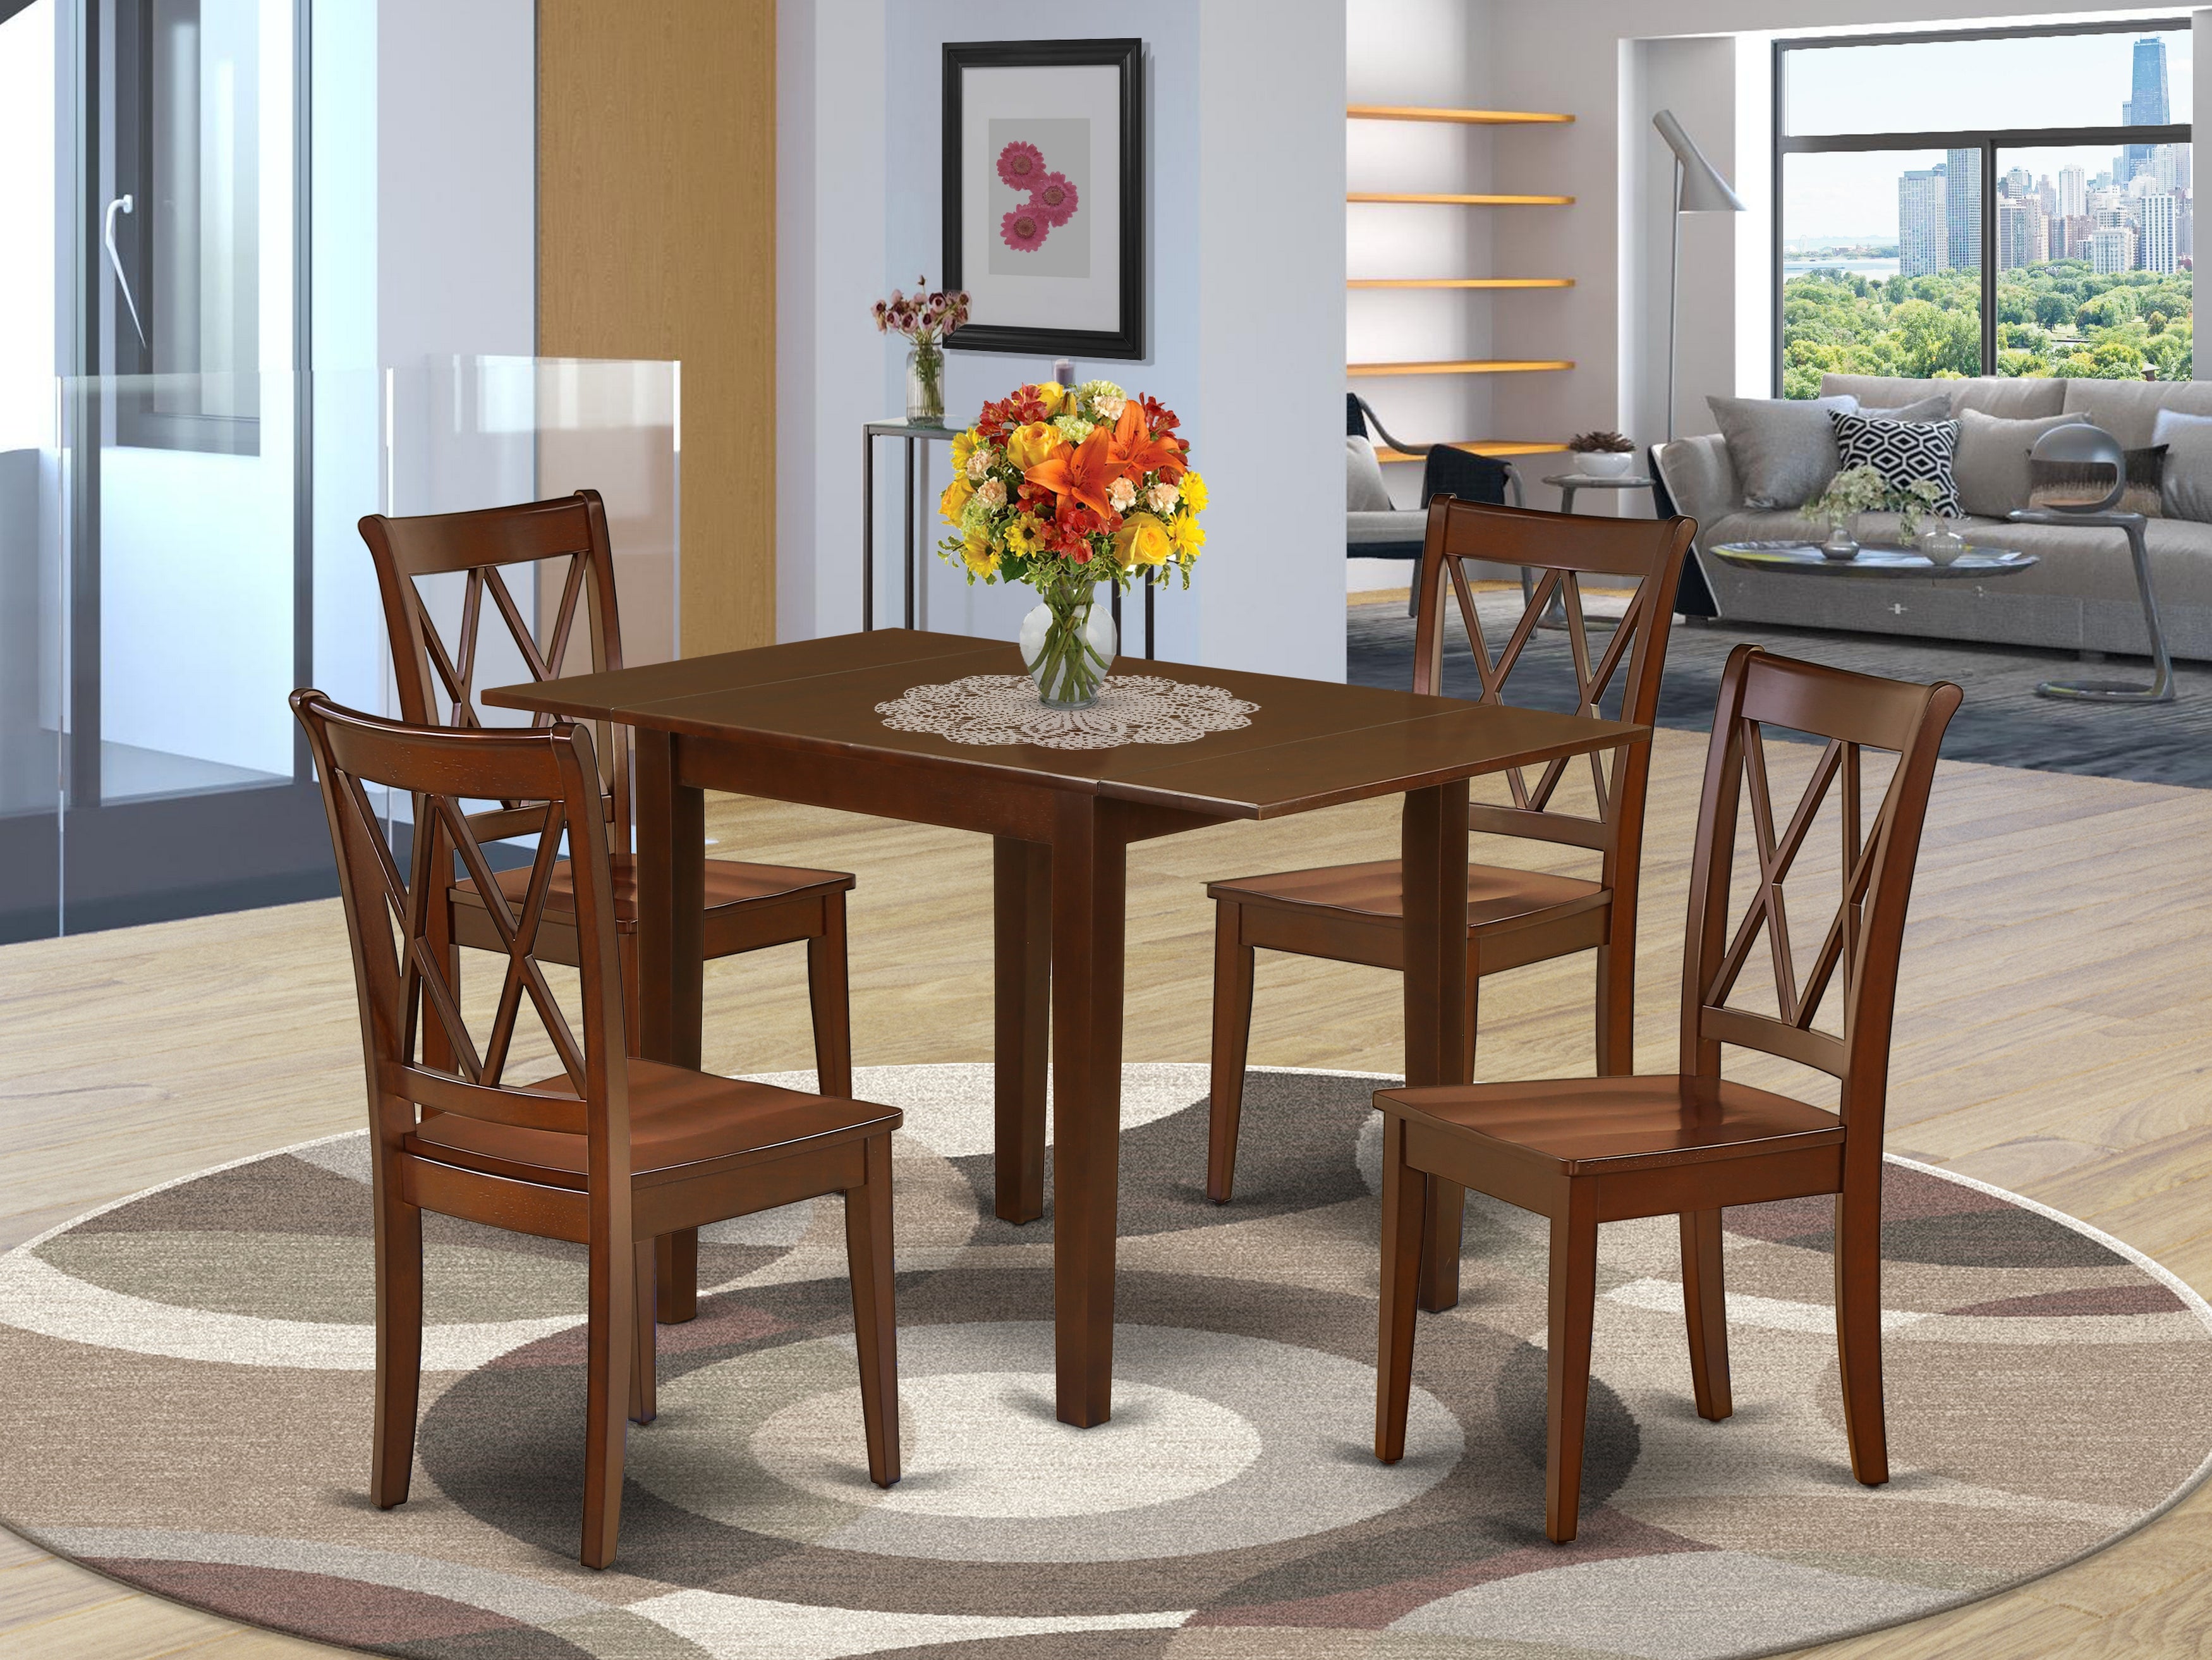 East West Furniture NDCL5-MAH-W Dining Room Table Set 5 Pcs- 4 Awesome Dining Room Chairs and a Fantastic modern Dining Table - Mahogany Finish Hardwood Chair Seat and Table Top - Mahogany Finish Solid wood Structure.